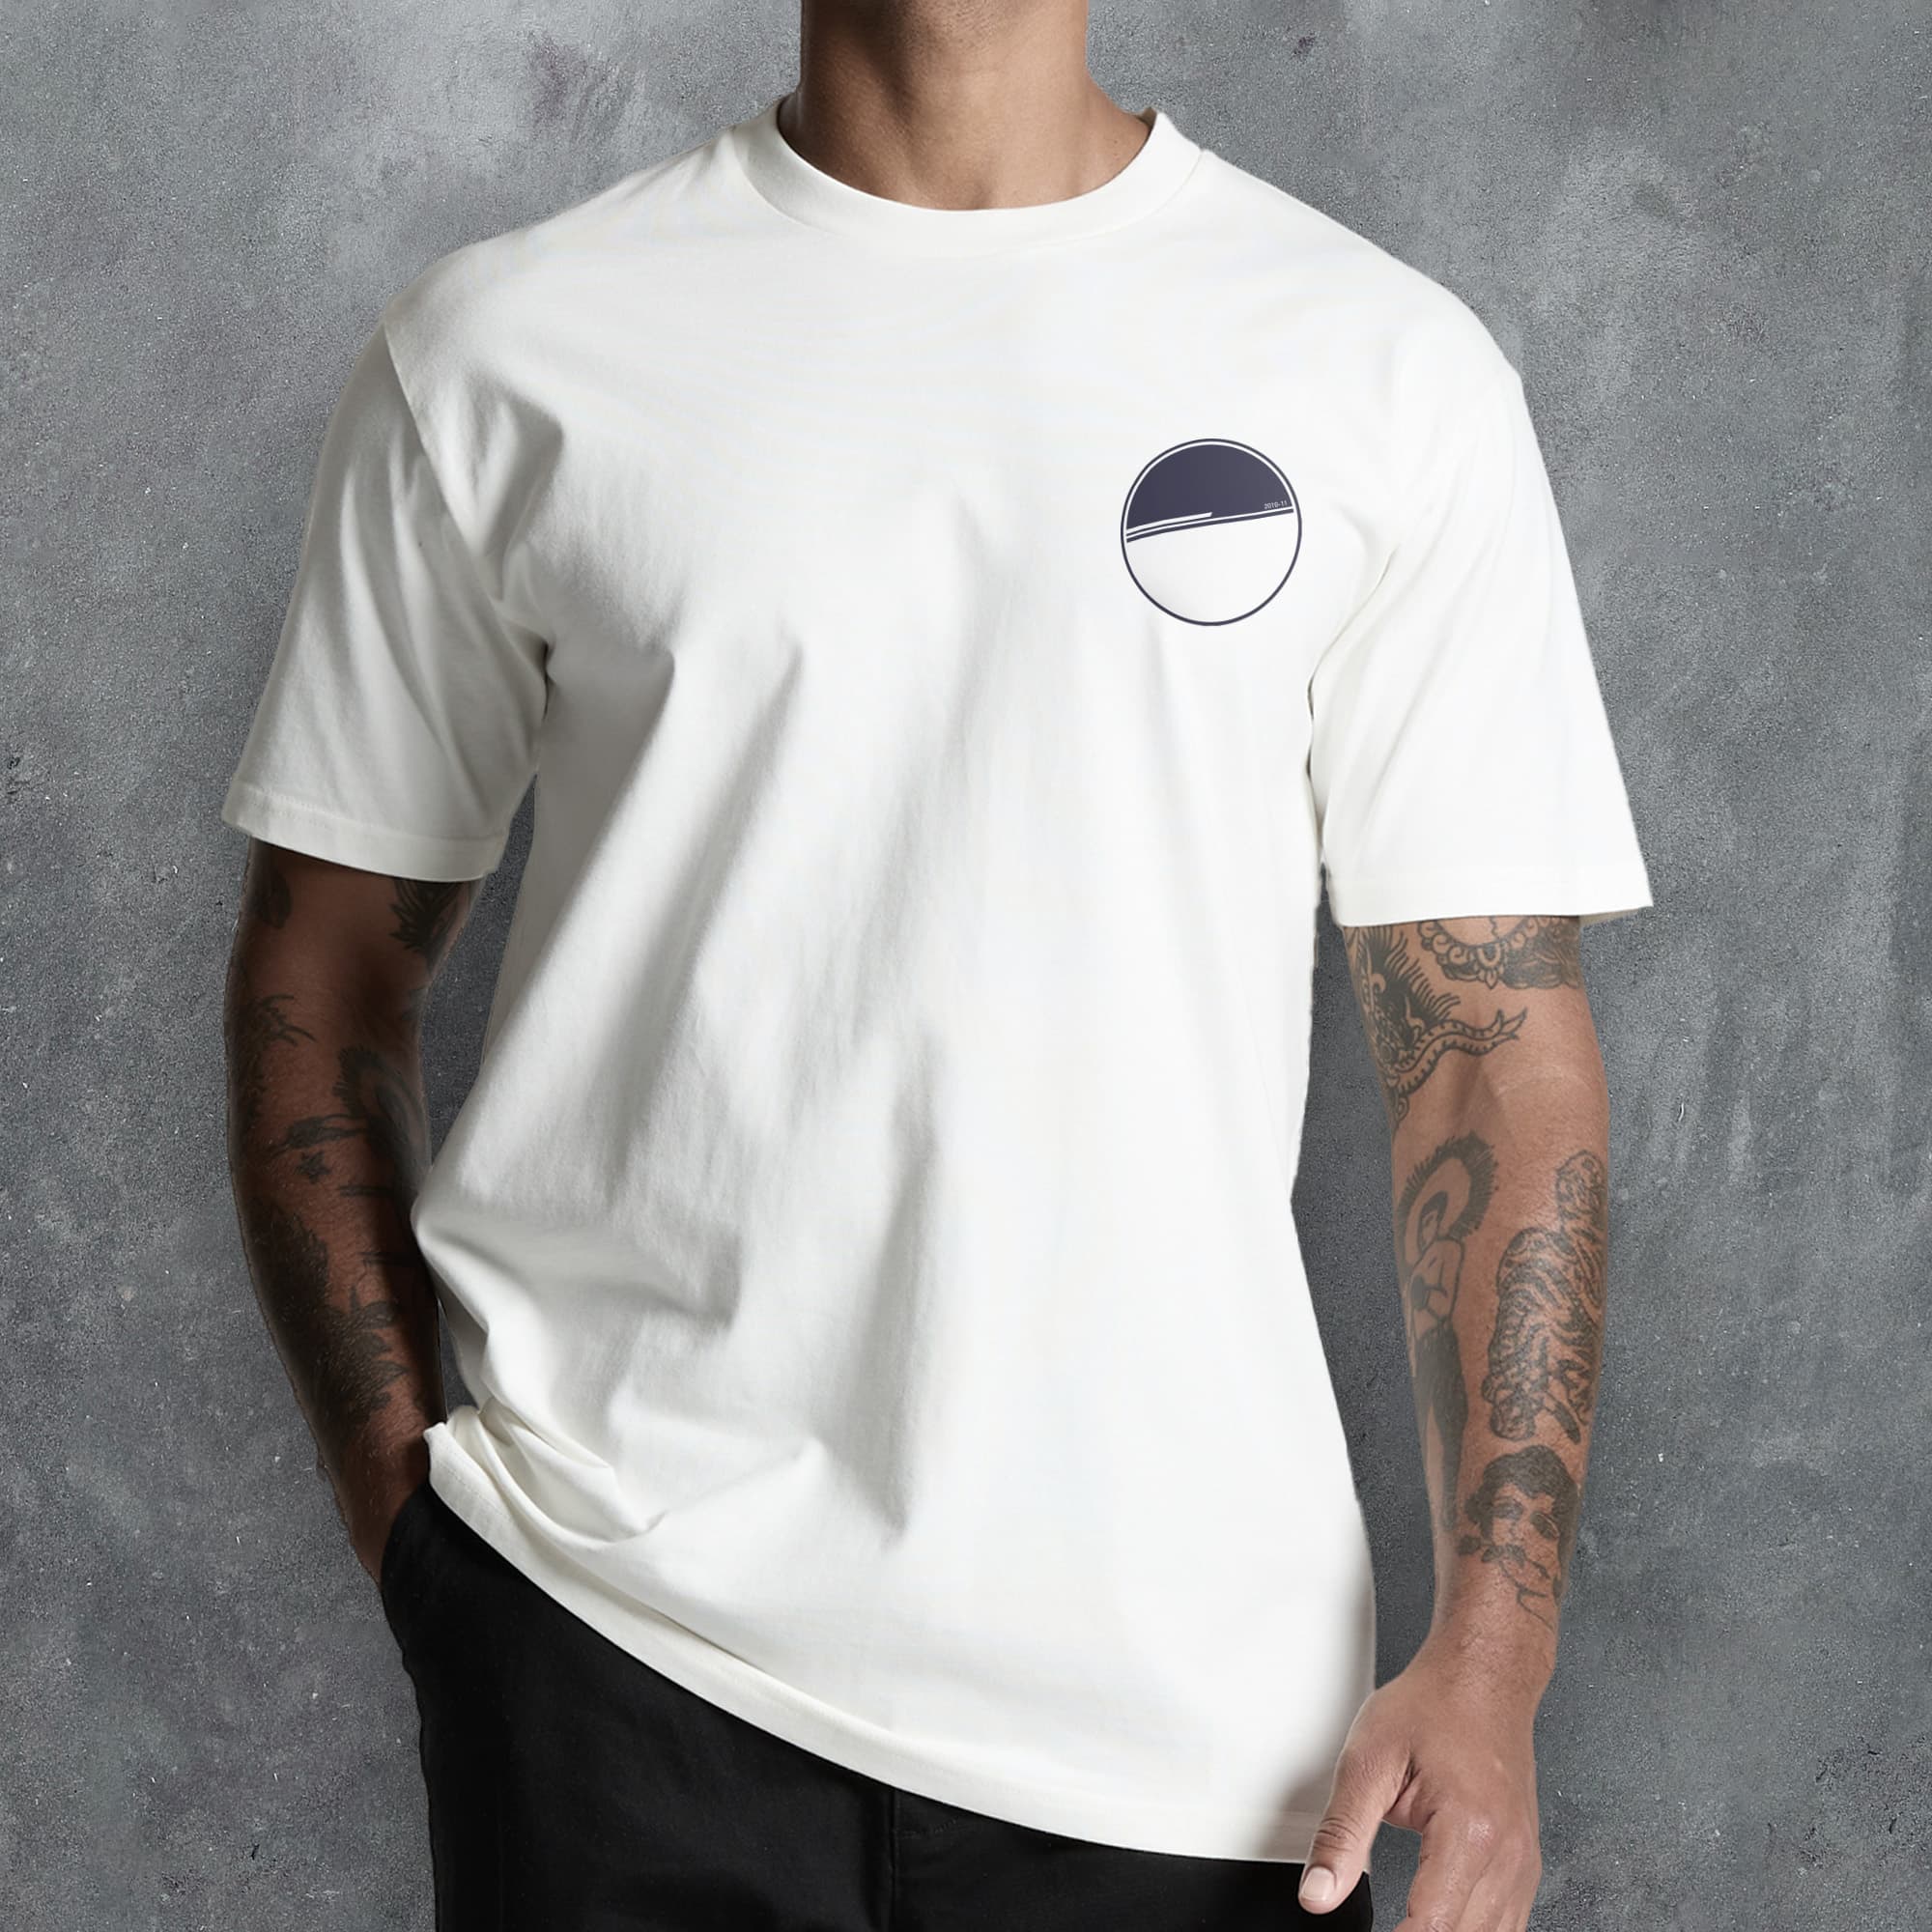 a man wearing a white t - shirt with a black circle on it